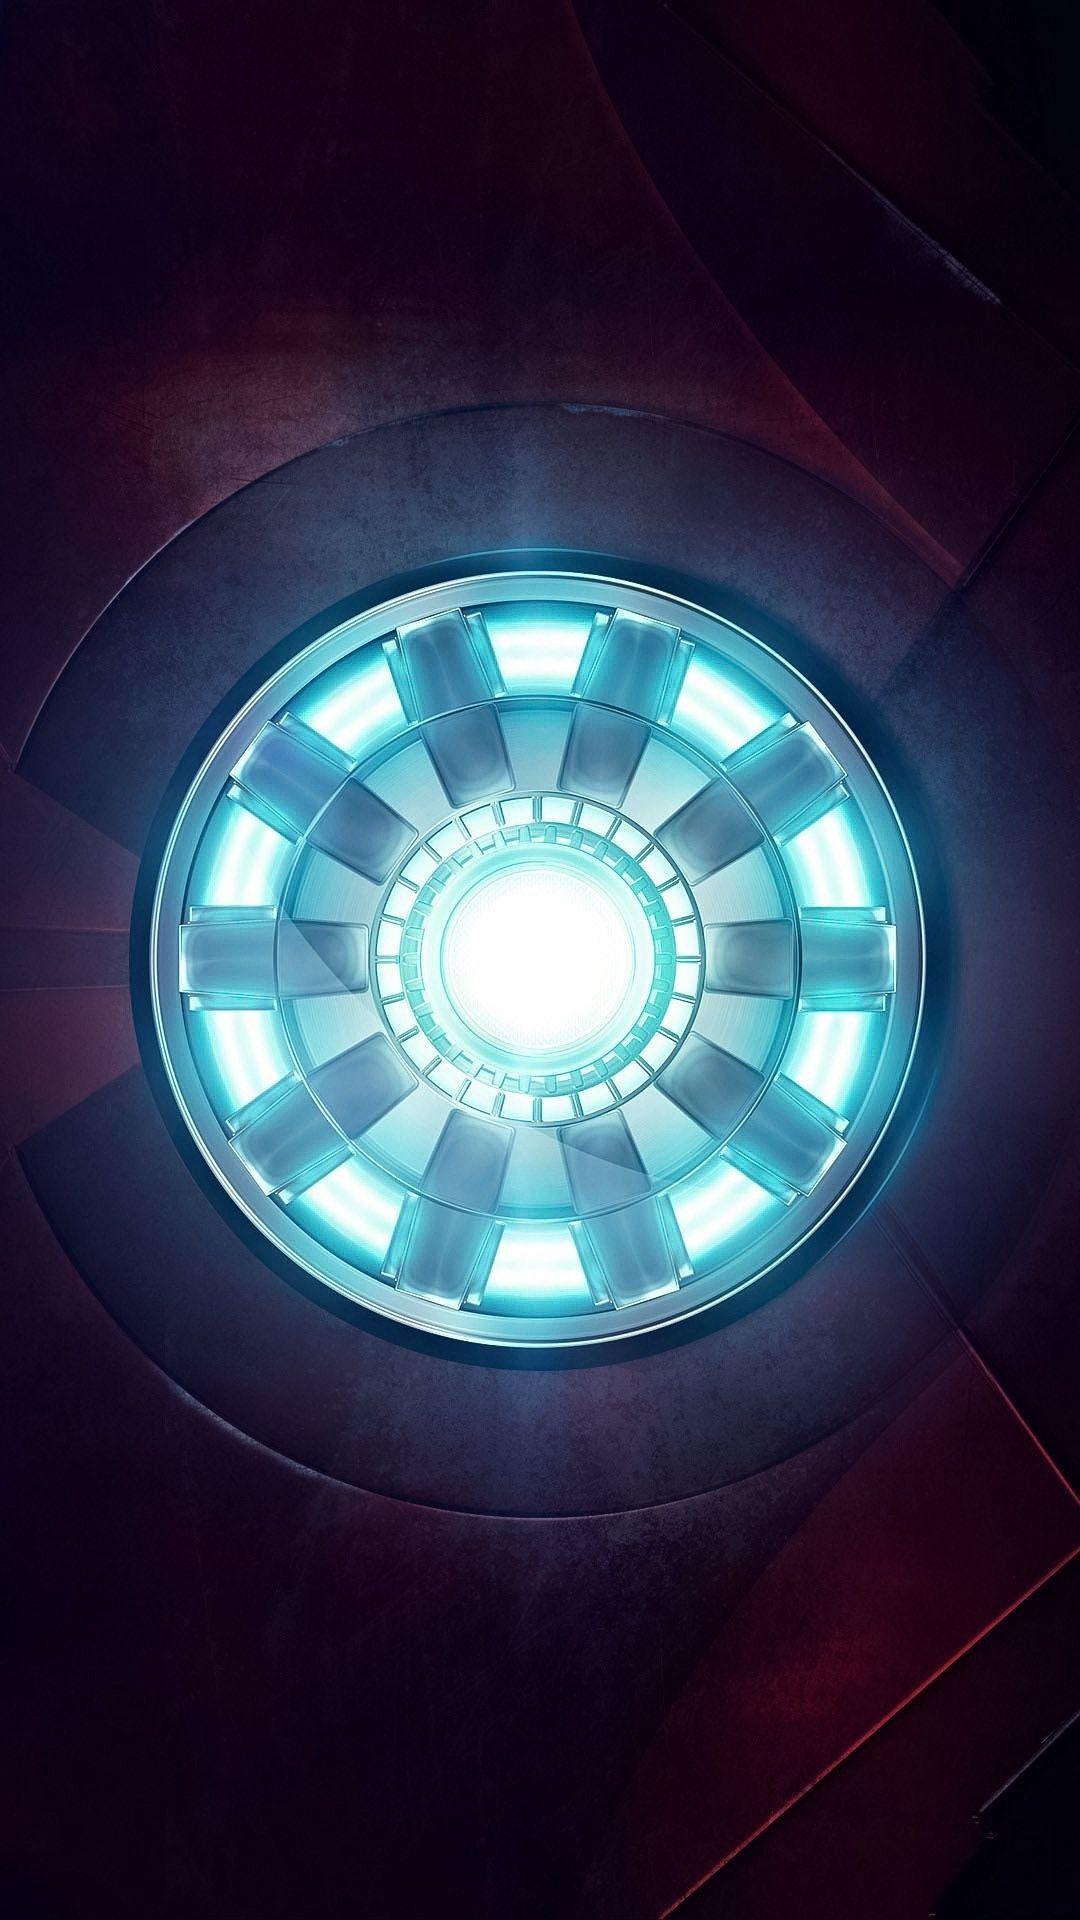 Iron Man Arc Reactor Wallpaper now to grab yourself a super